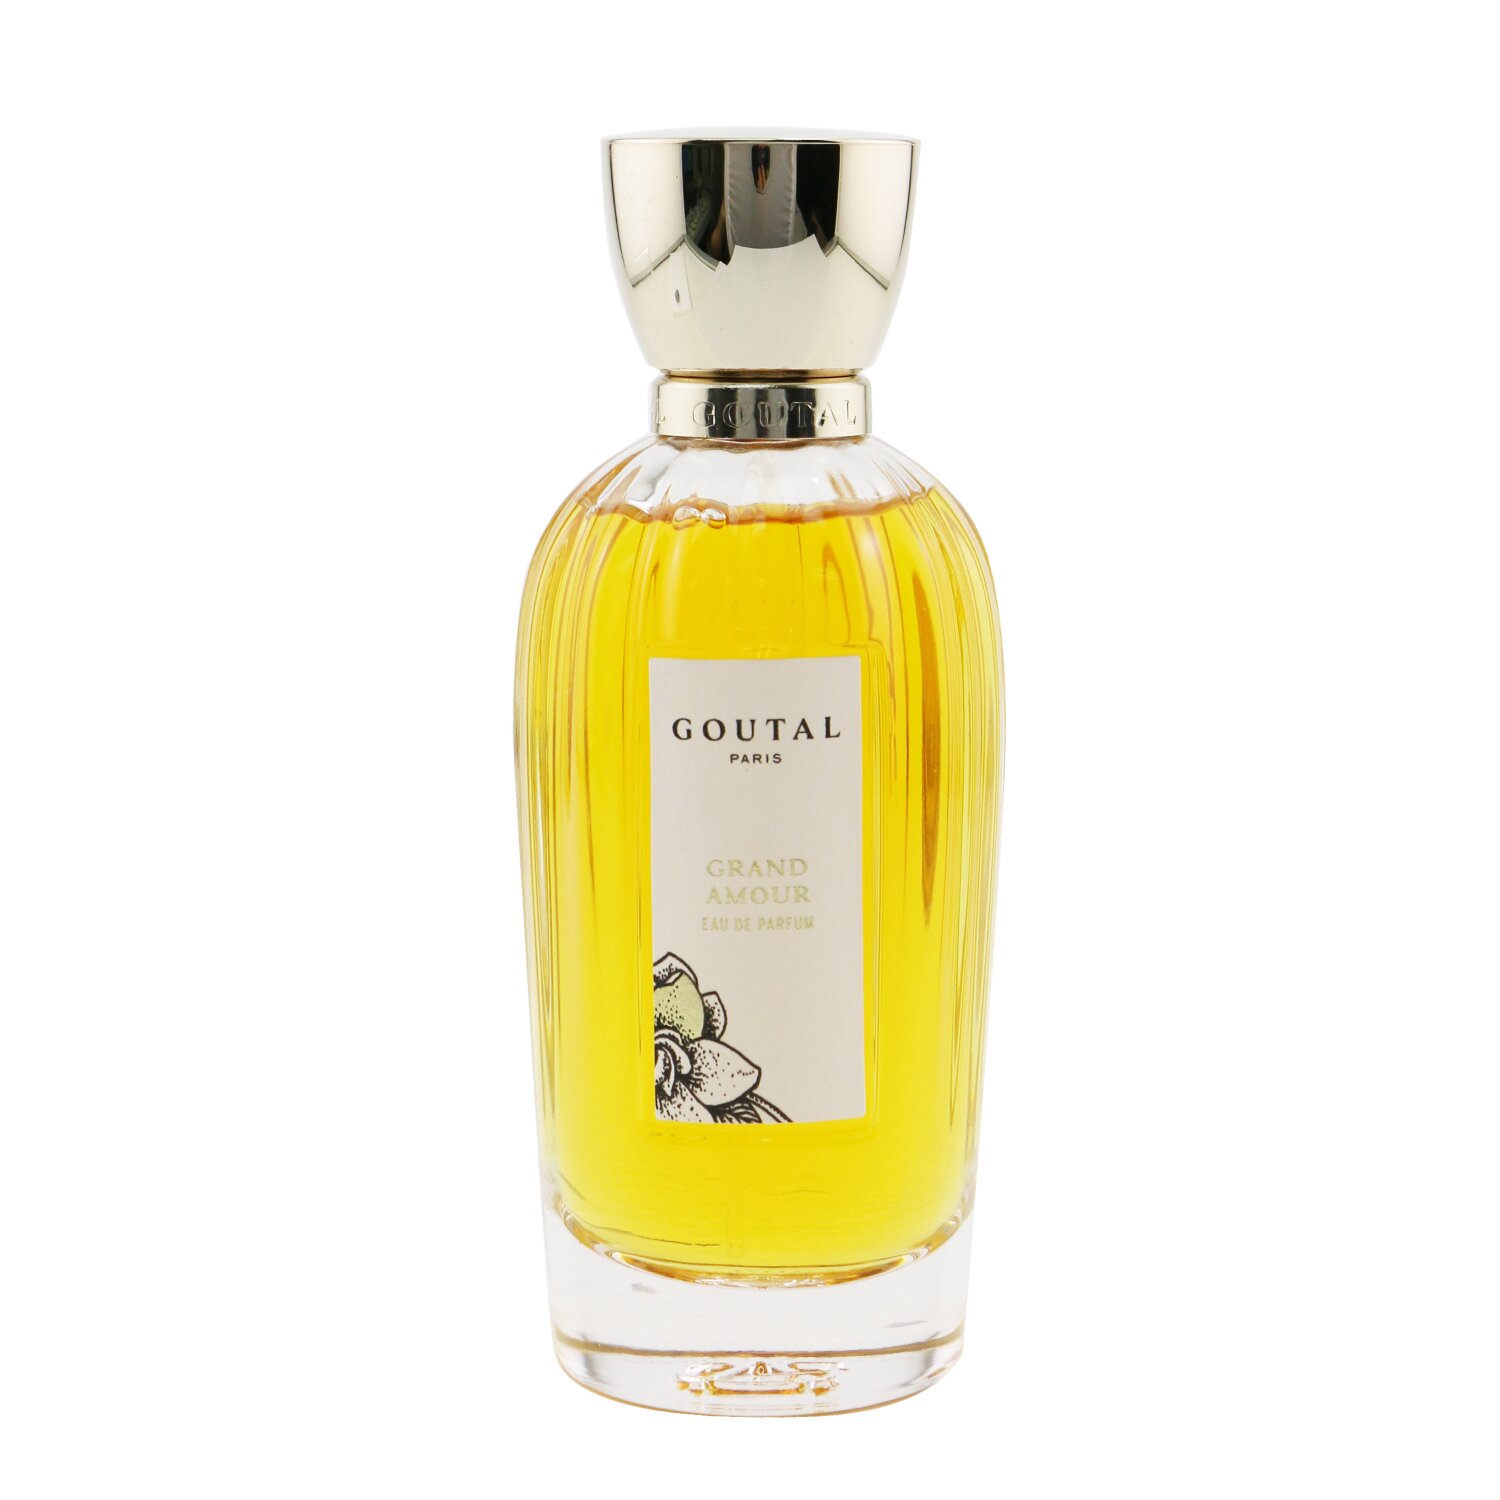 Goutal (Annick Goutal) - Grand Amour 香水噴霧